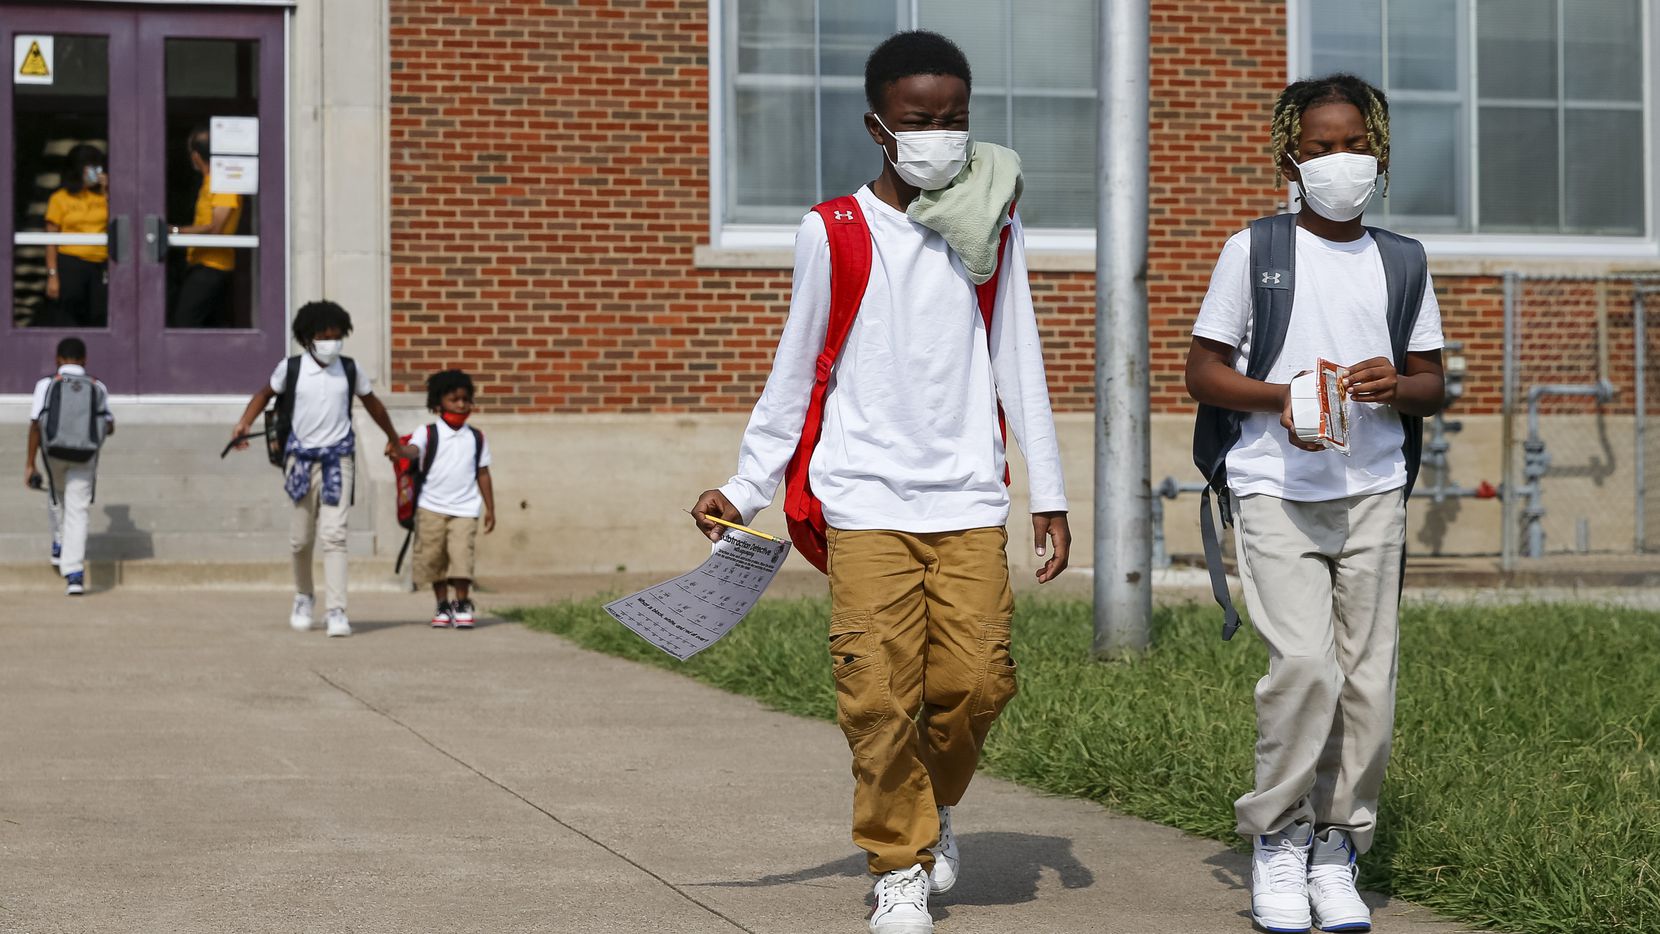 Jerrell Brown, 9 (left), walks with Jayce Williams, 7, after a day of classes at Paul L. Dunbar Learning Center on Wednesday, Sept. 8, 2021, in Dallas. (Elias Valverde II/The Dallas Morning News)